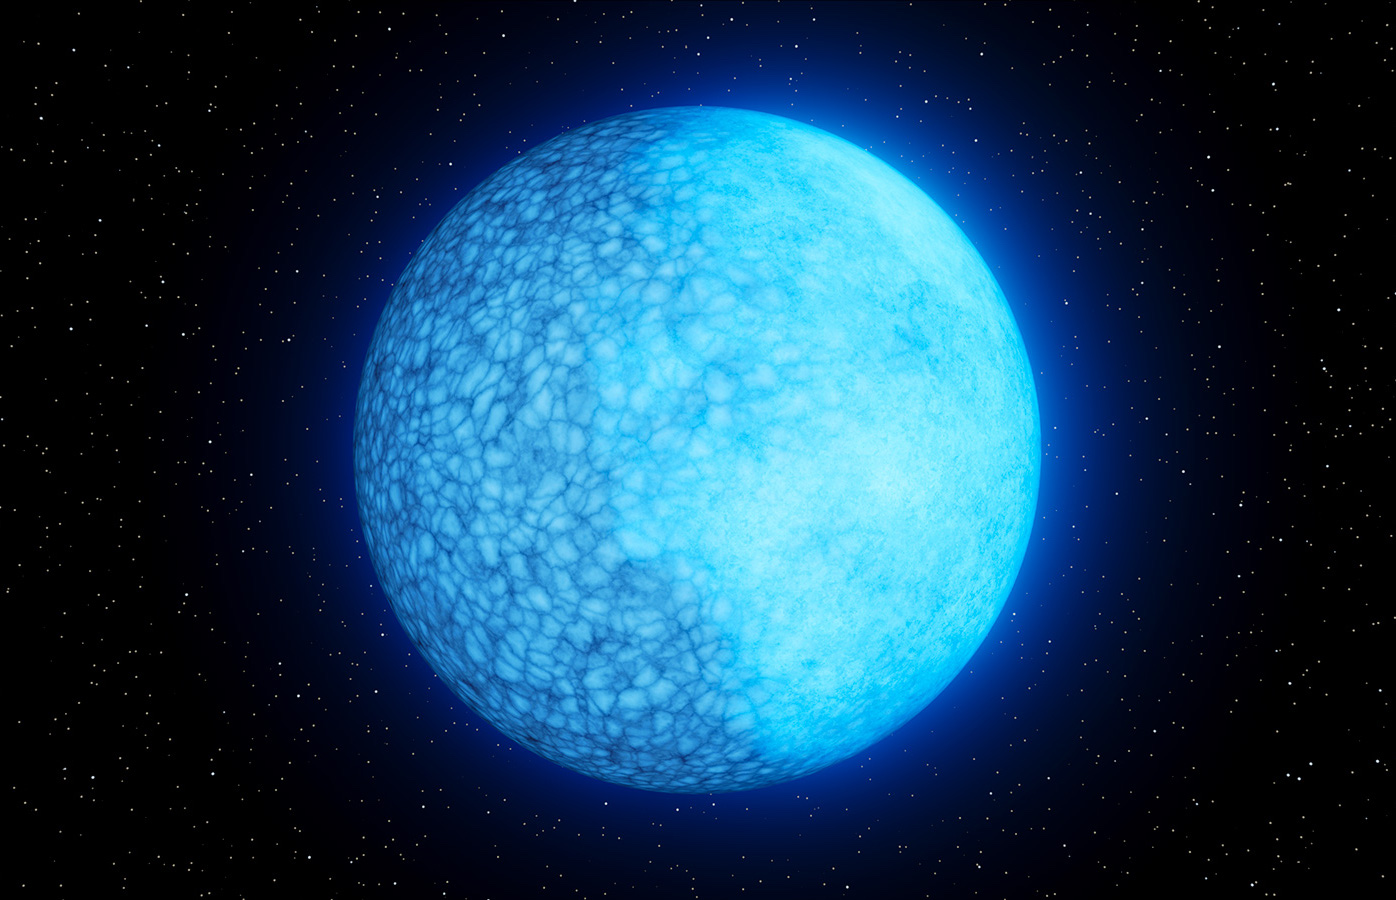 an illustration of w light blue sphere, which is a white dwarf star, in space